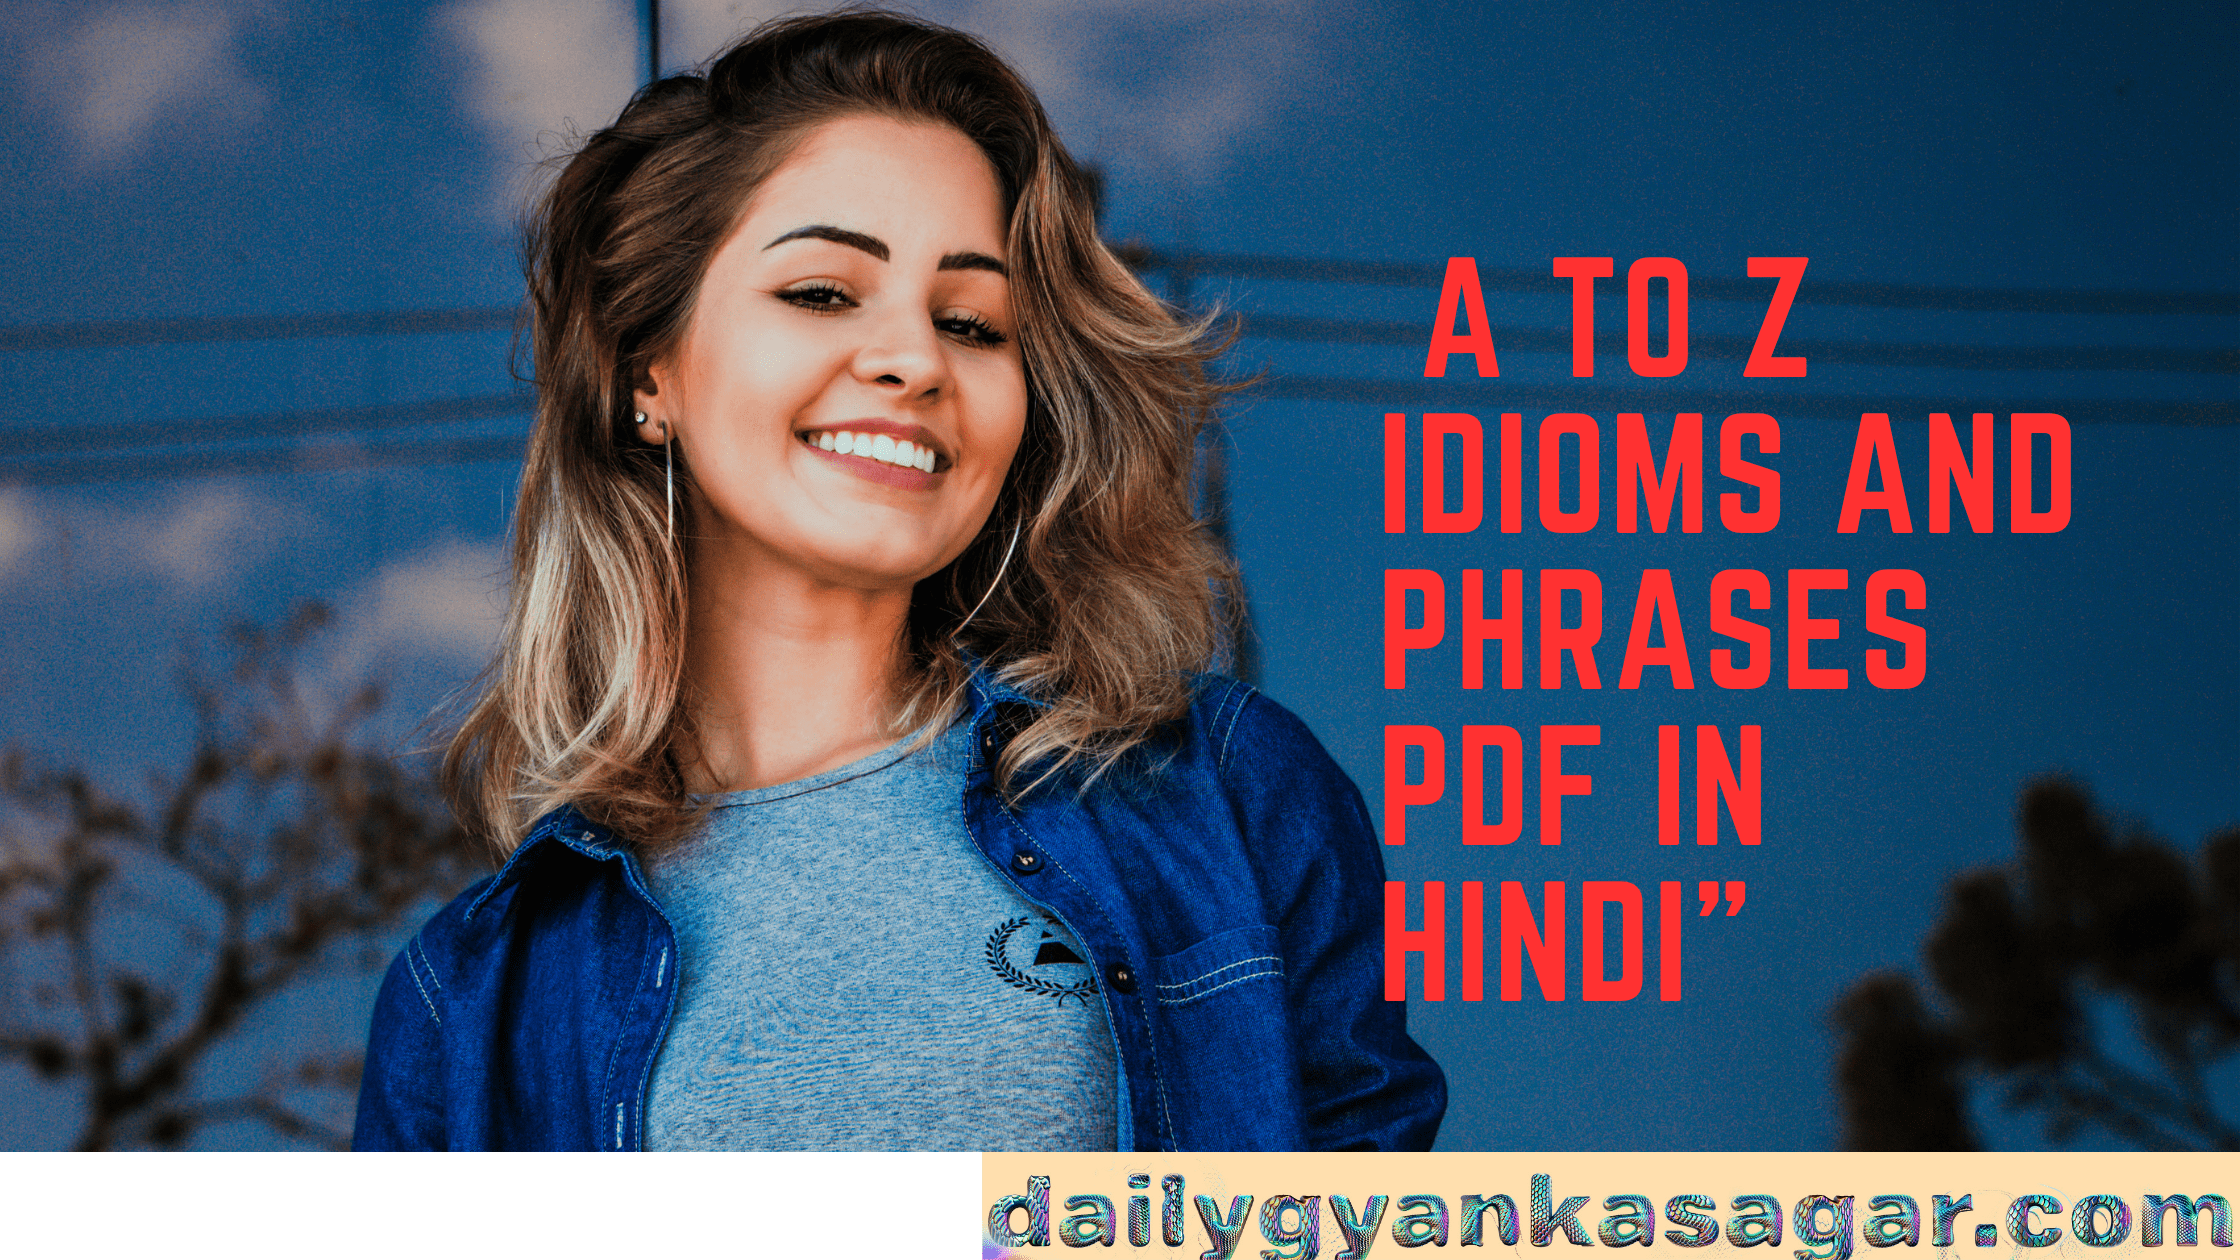 A to Z Idioms and Phrases PDF in Hindi